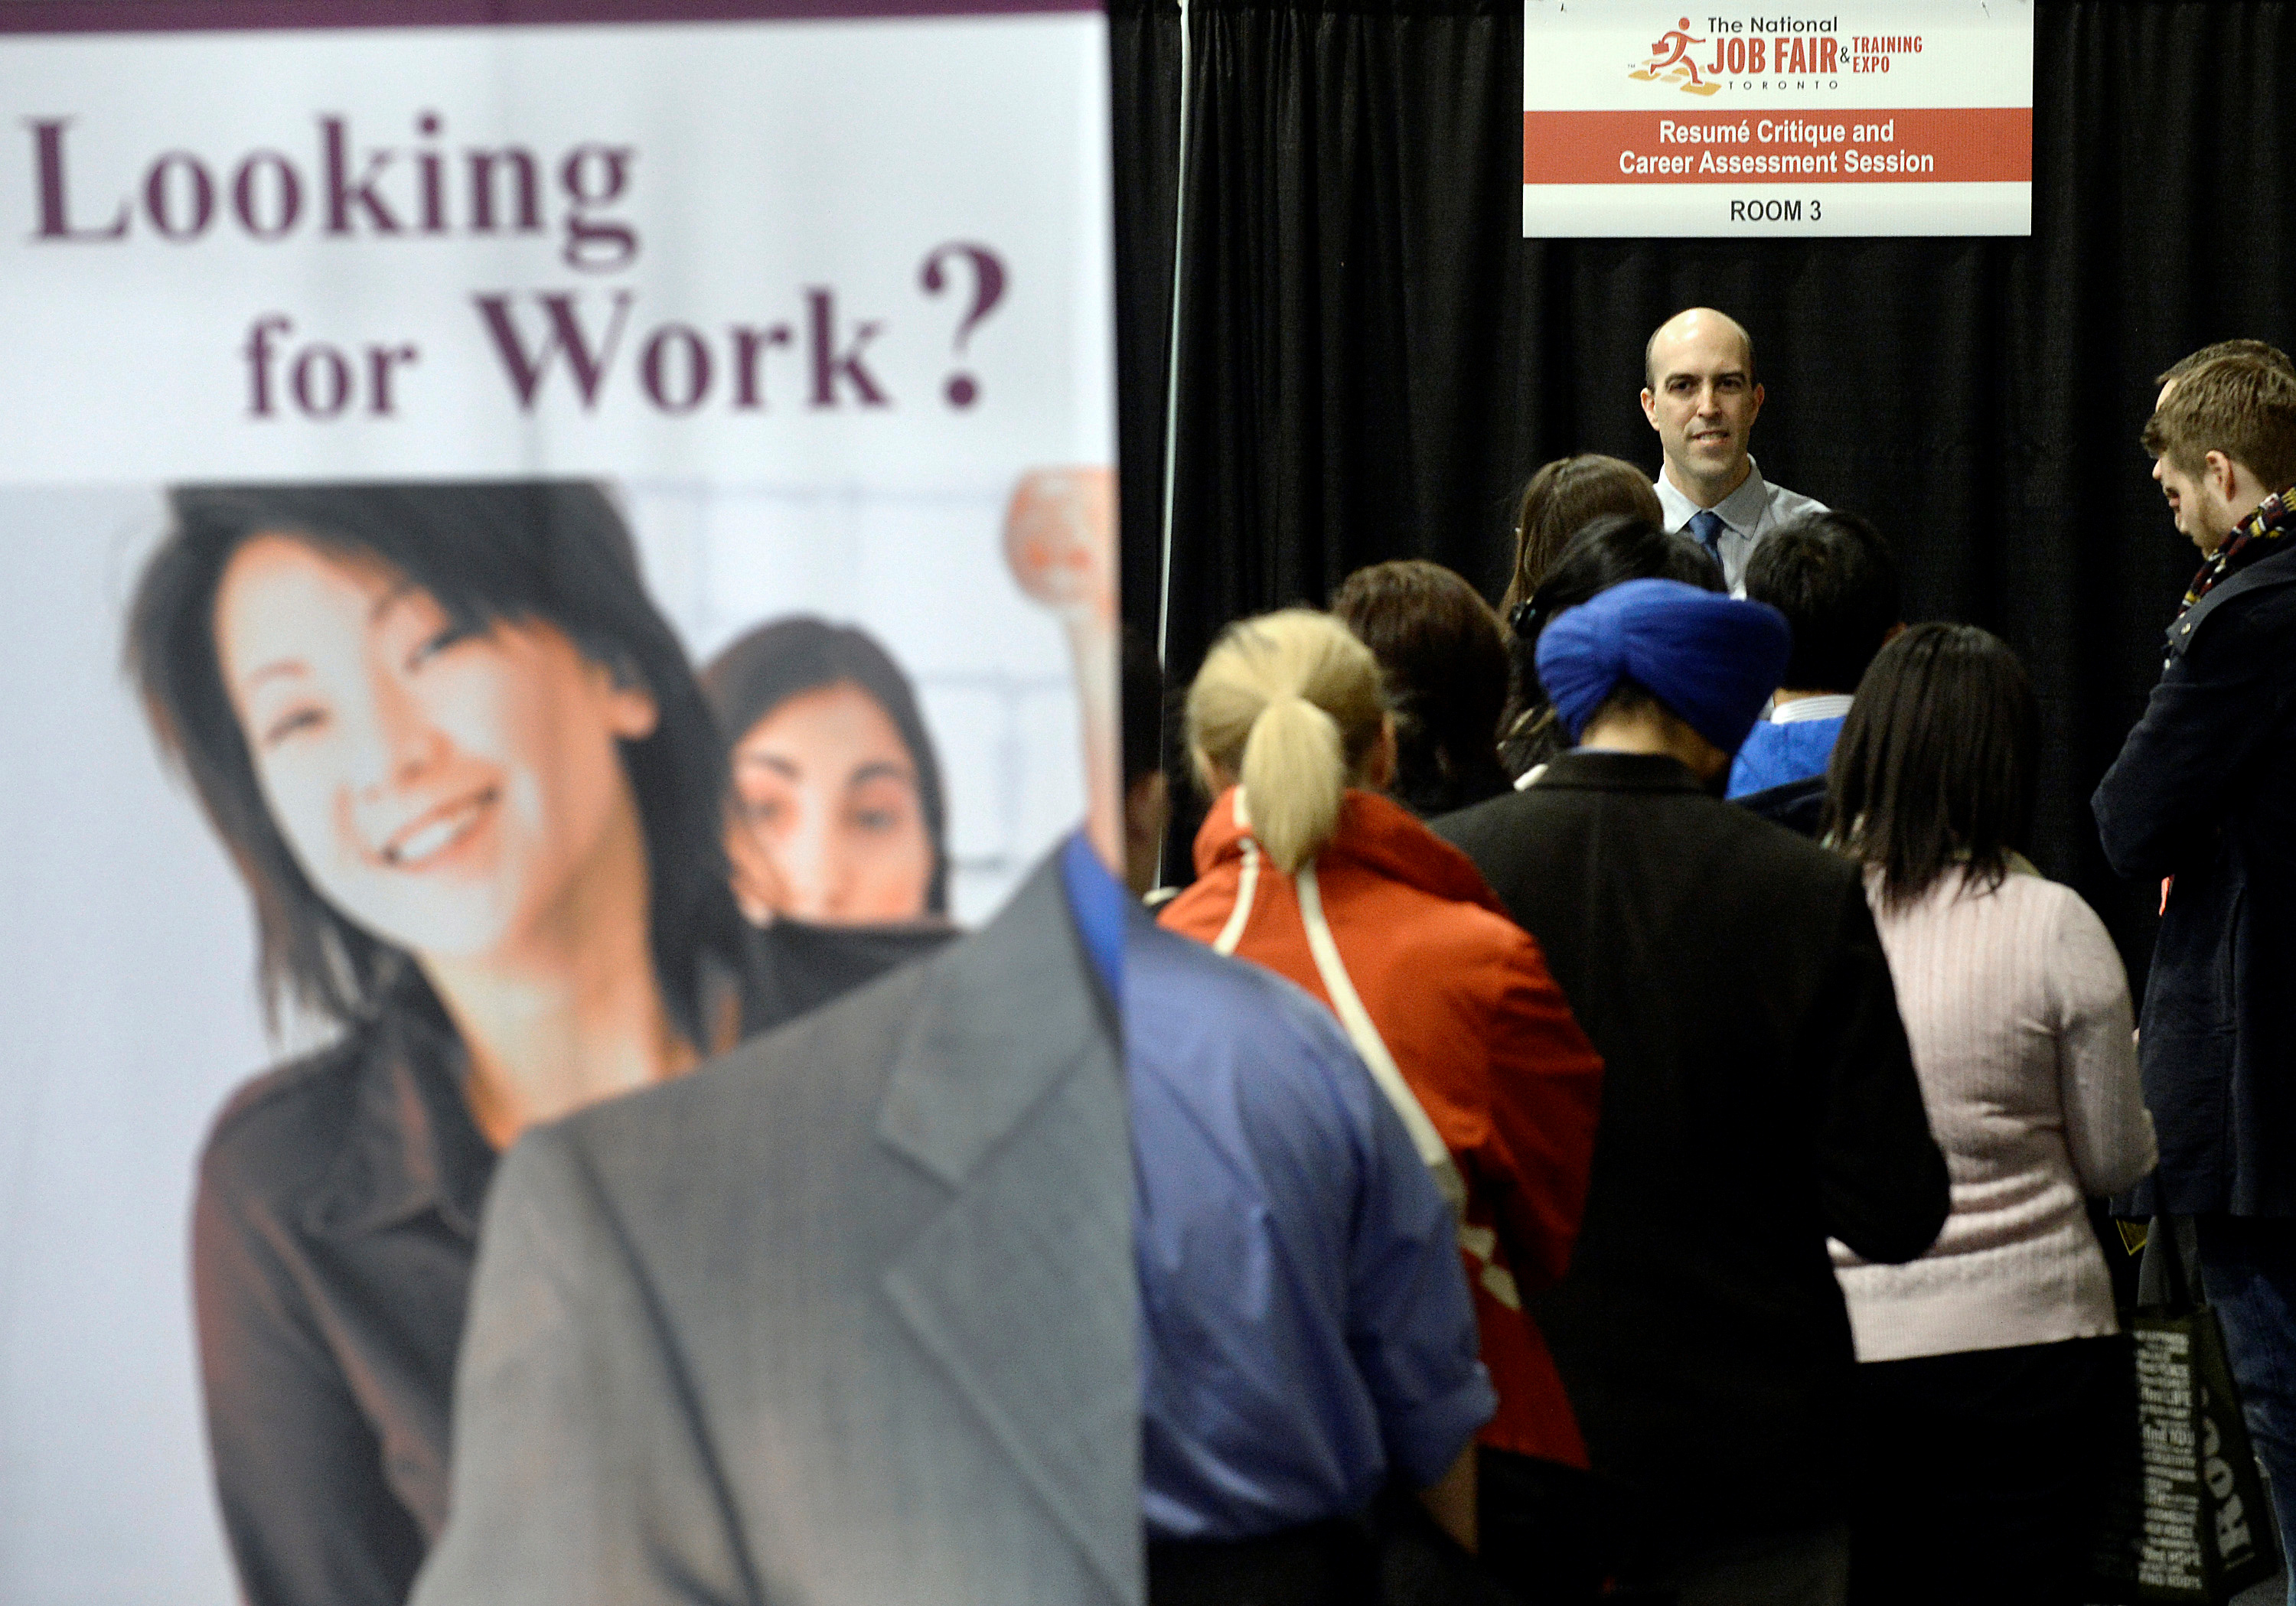 People wait in line for resume critique and career assessment sessions at 2014 Spring National Job Fair and Training Expo in Toronto